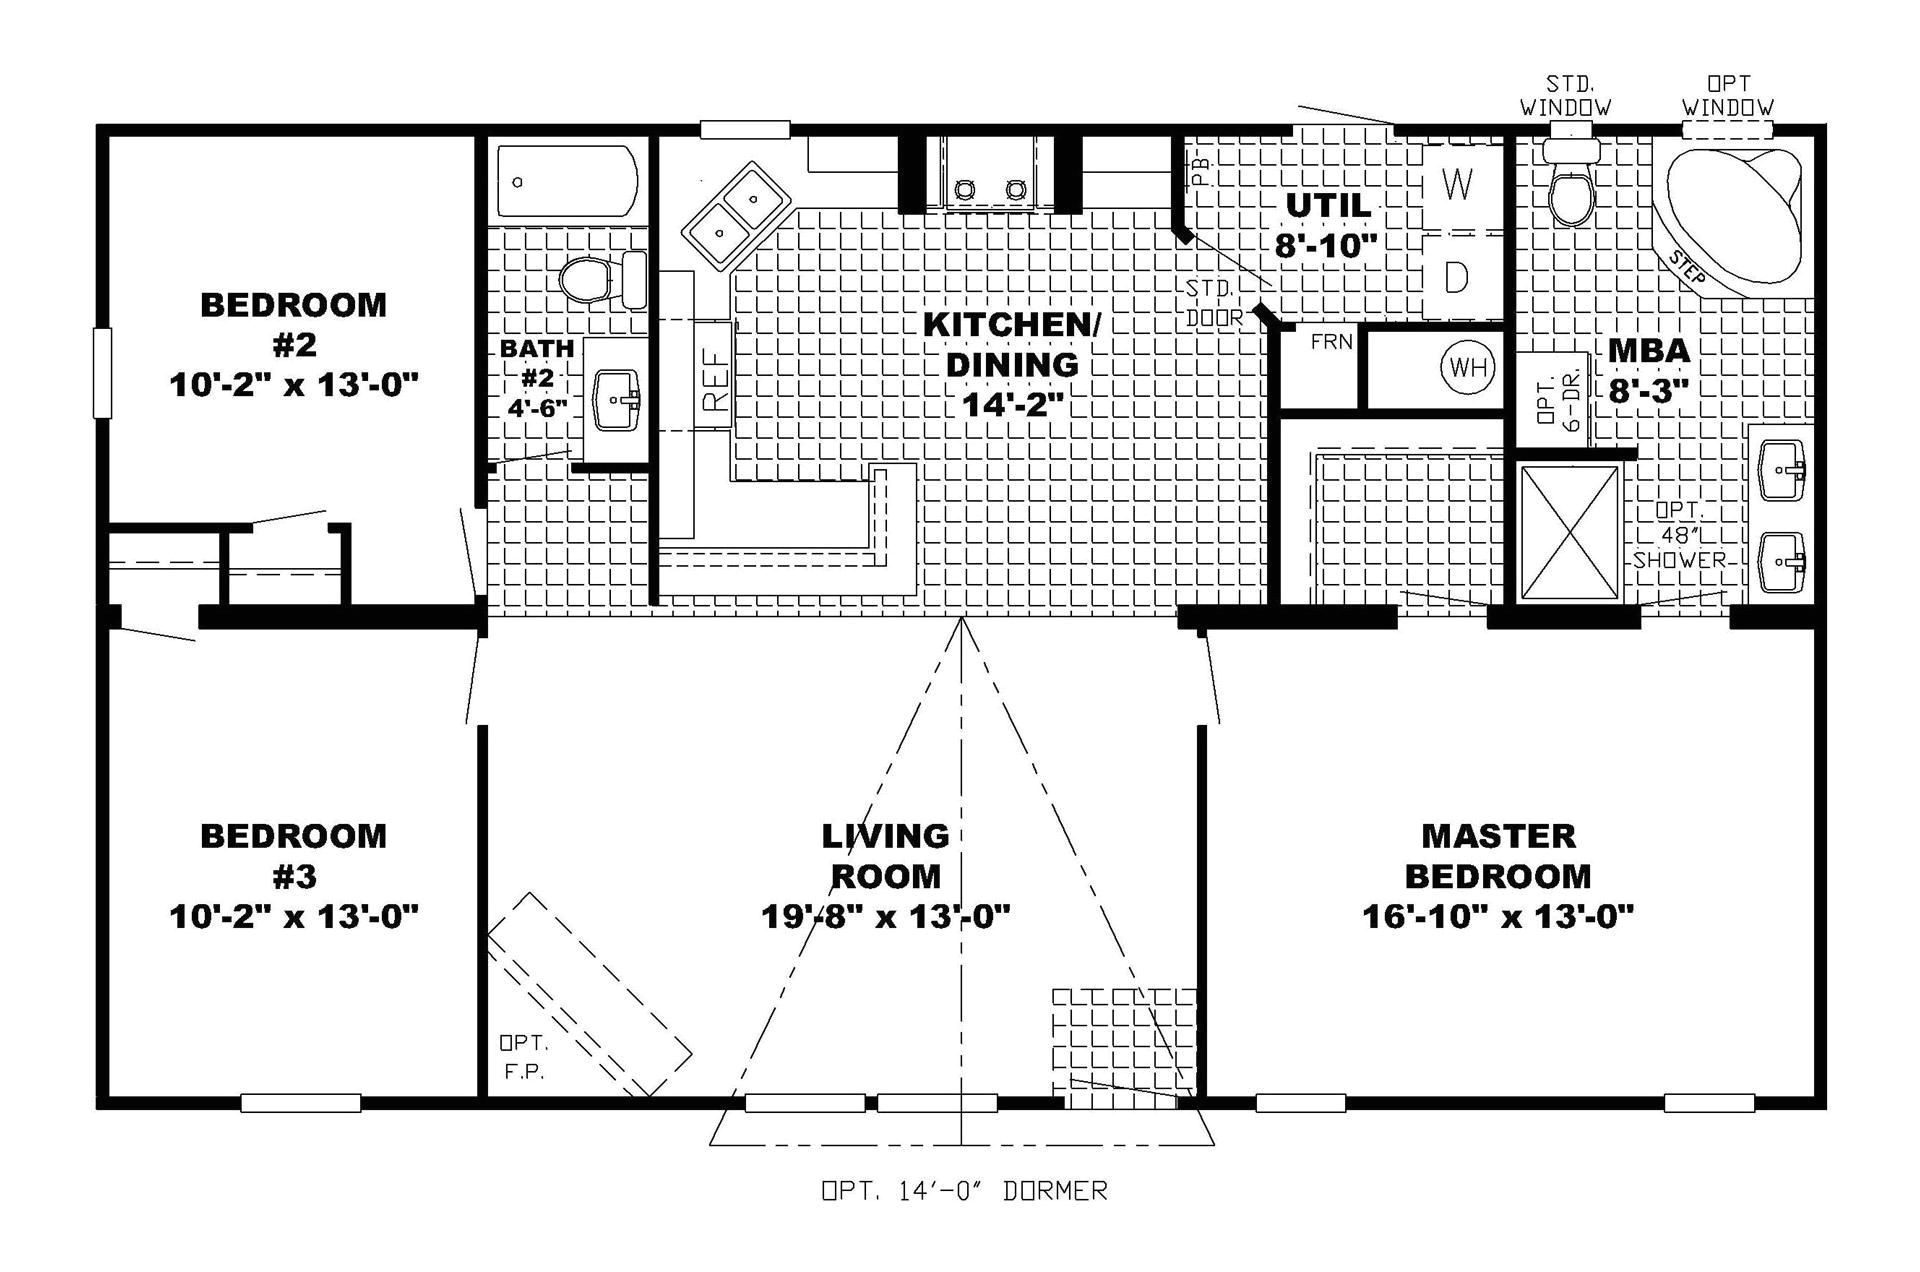 budget house plans luxury lowes home plans affordable house plans lovely new house plan hdc 0d